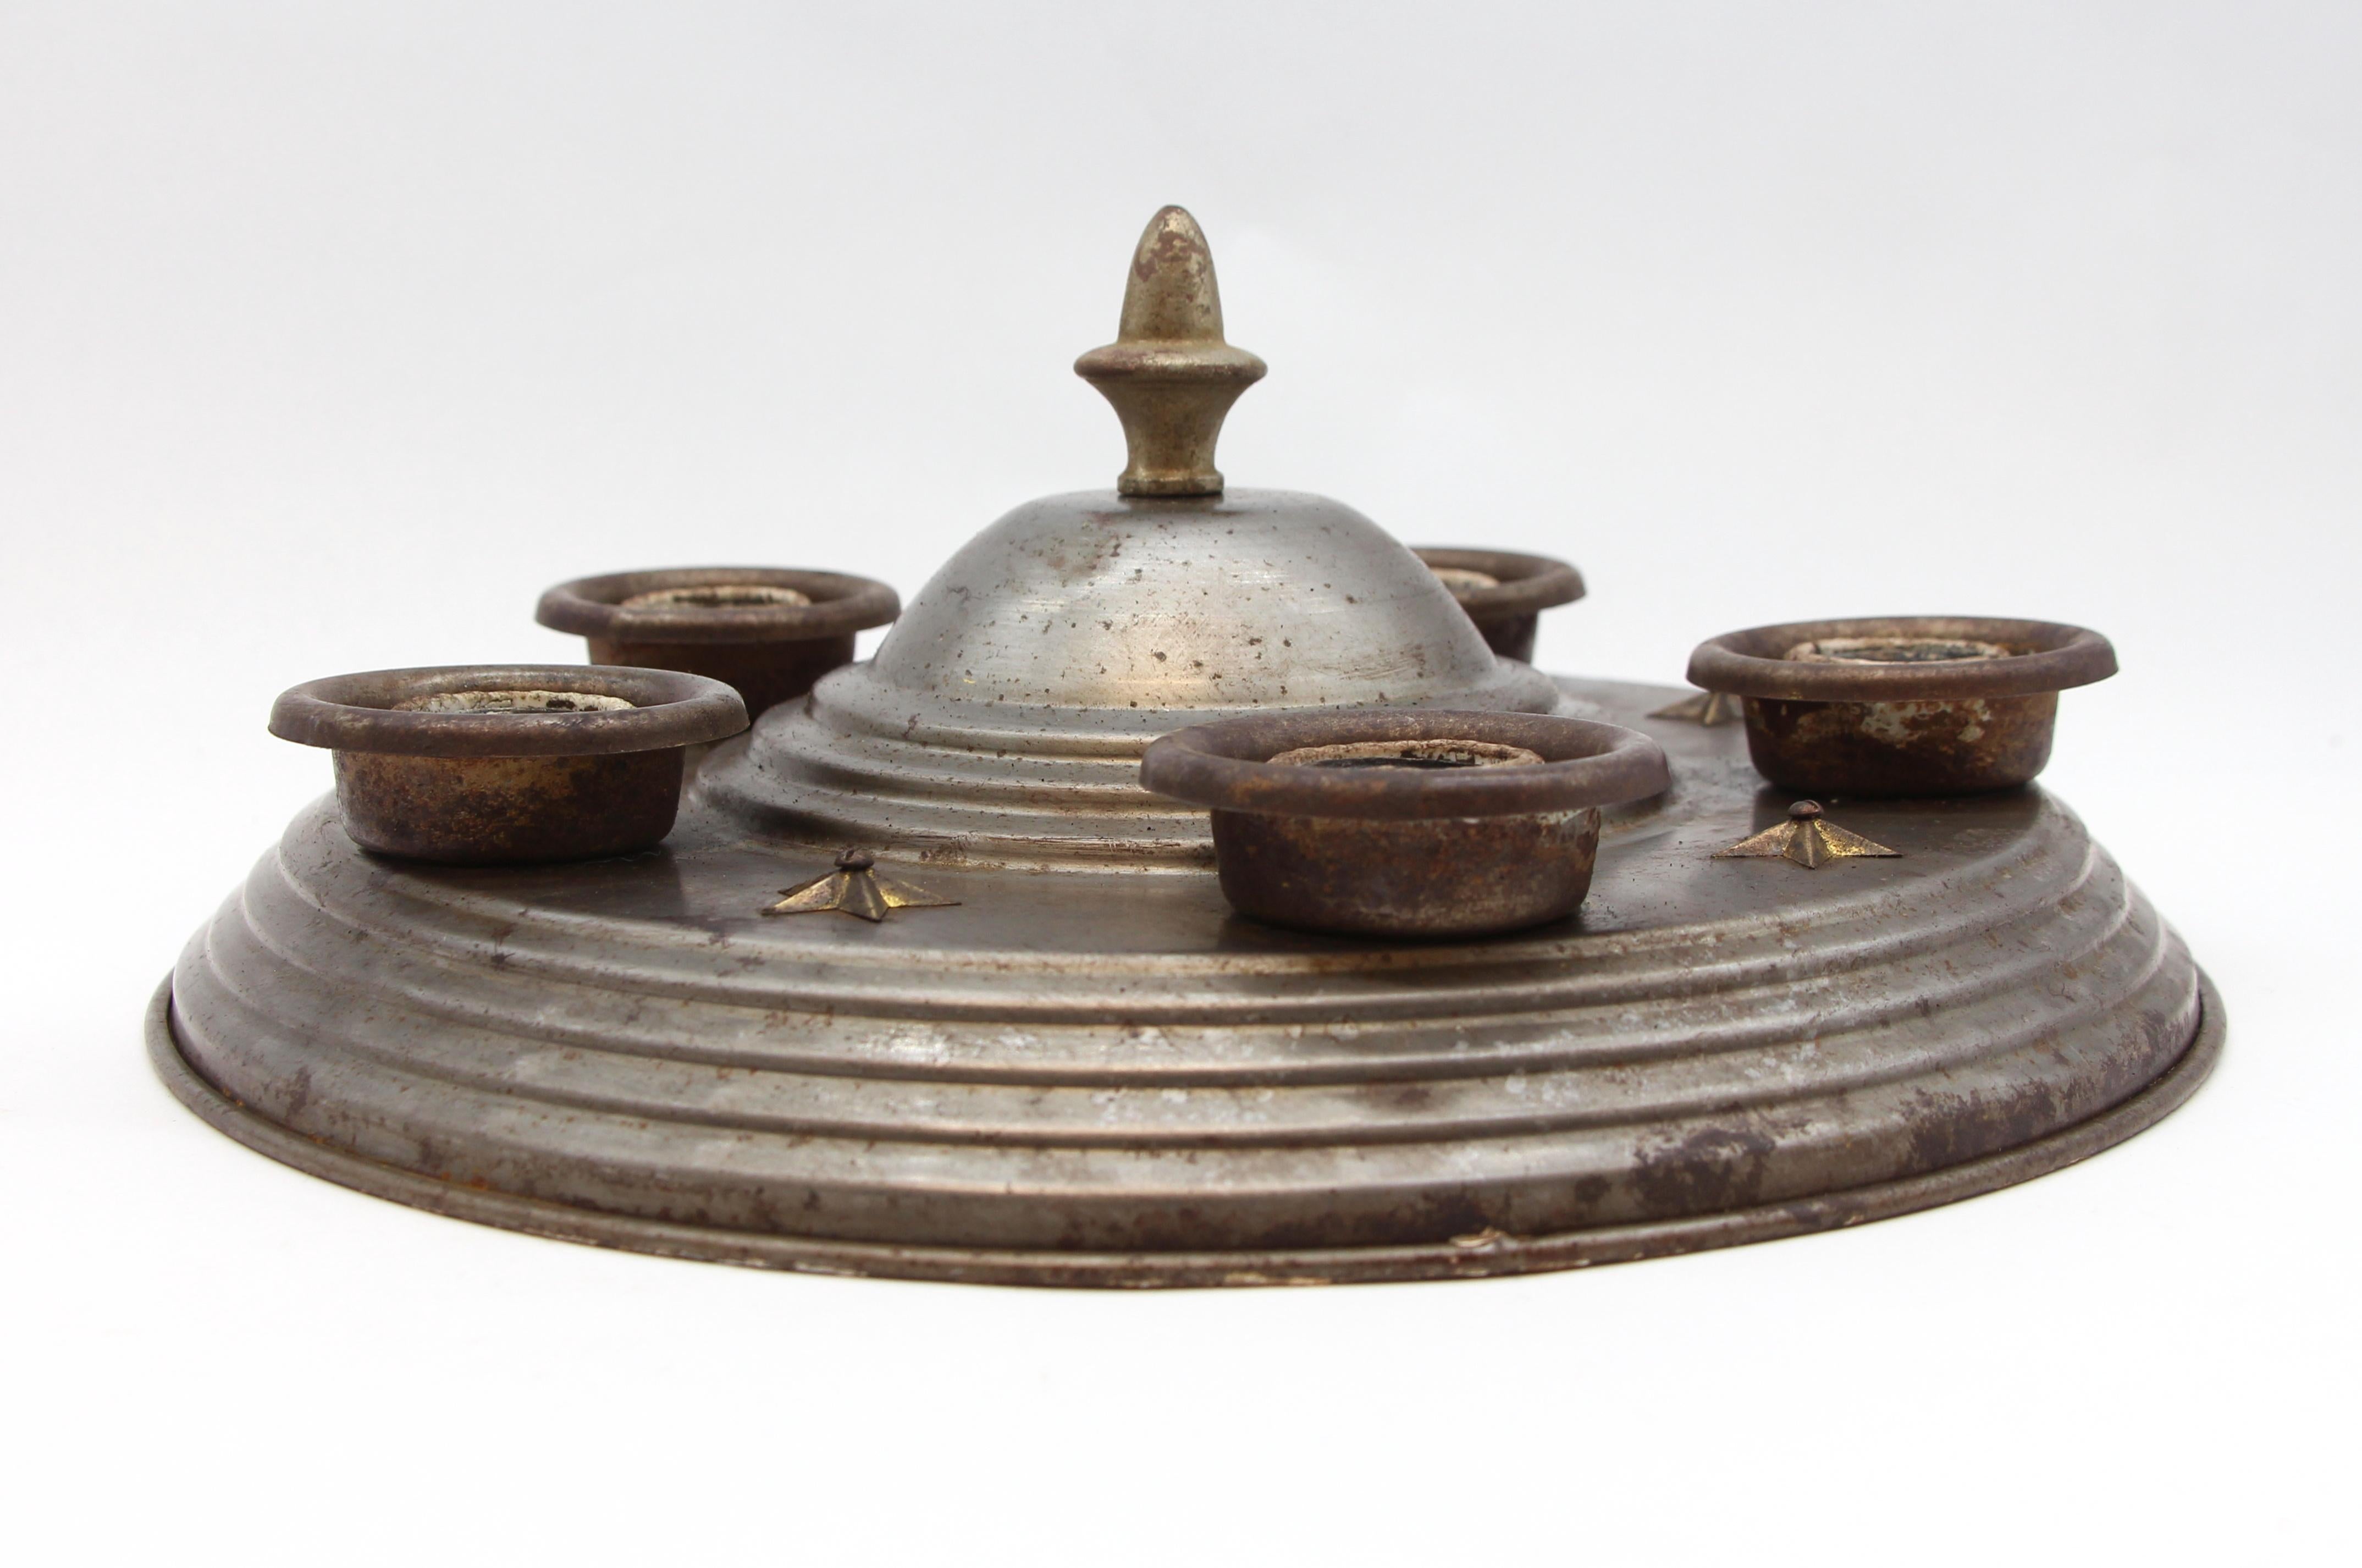 American Classical 1940s Galvanized Metal Pan Ceiling Fixture w/ 5 Sockets and Brass Star Accents